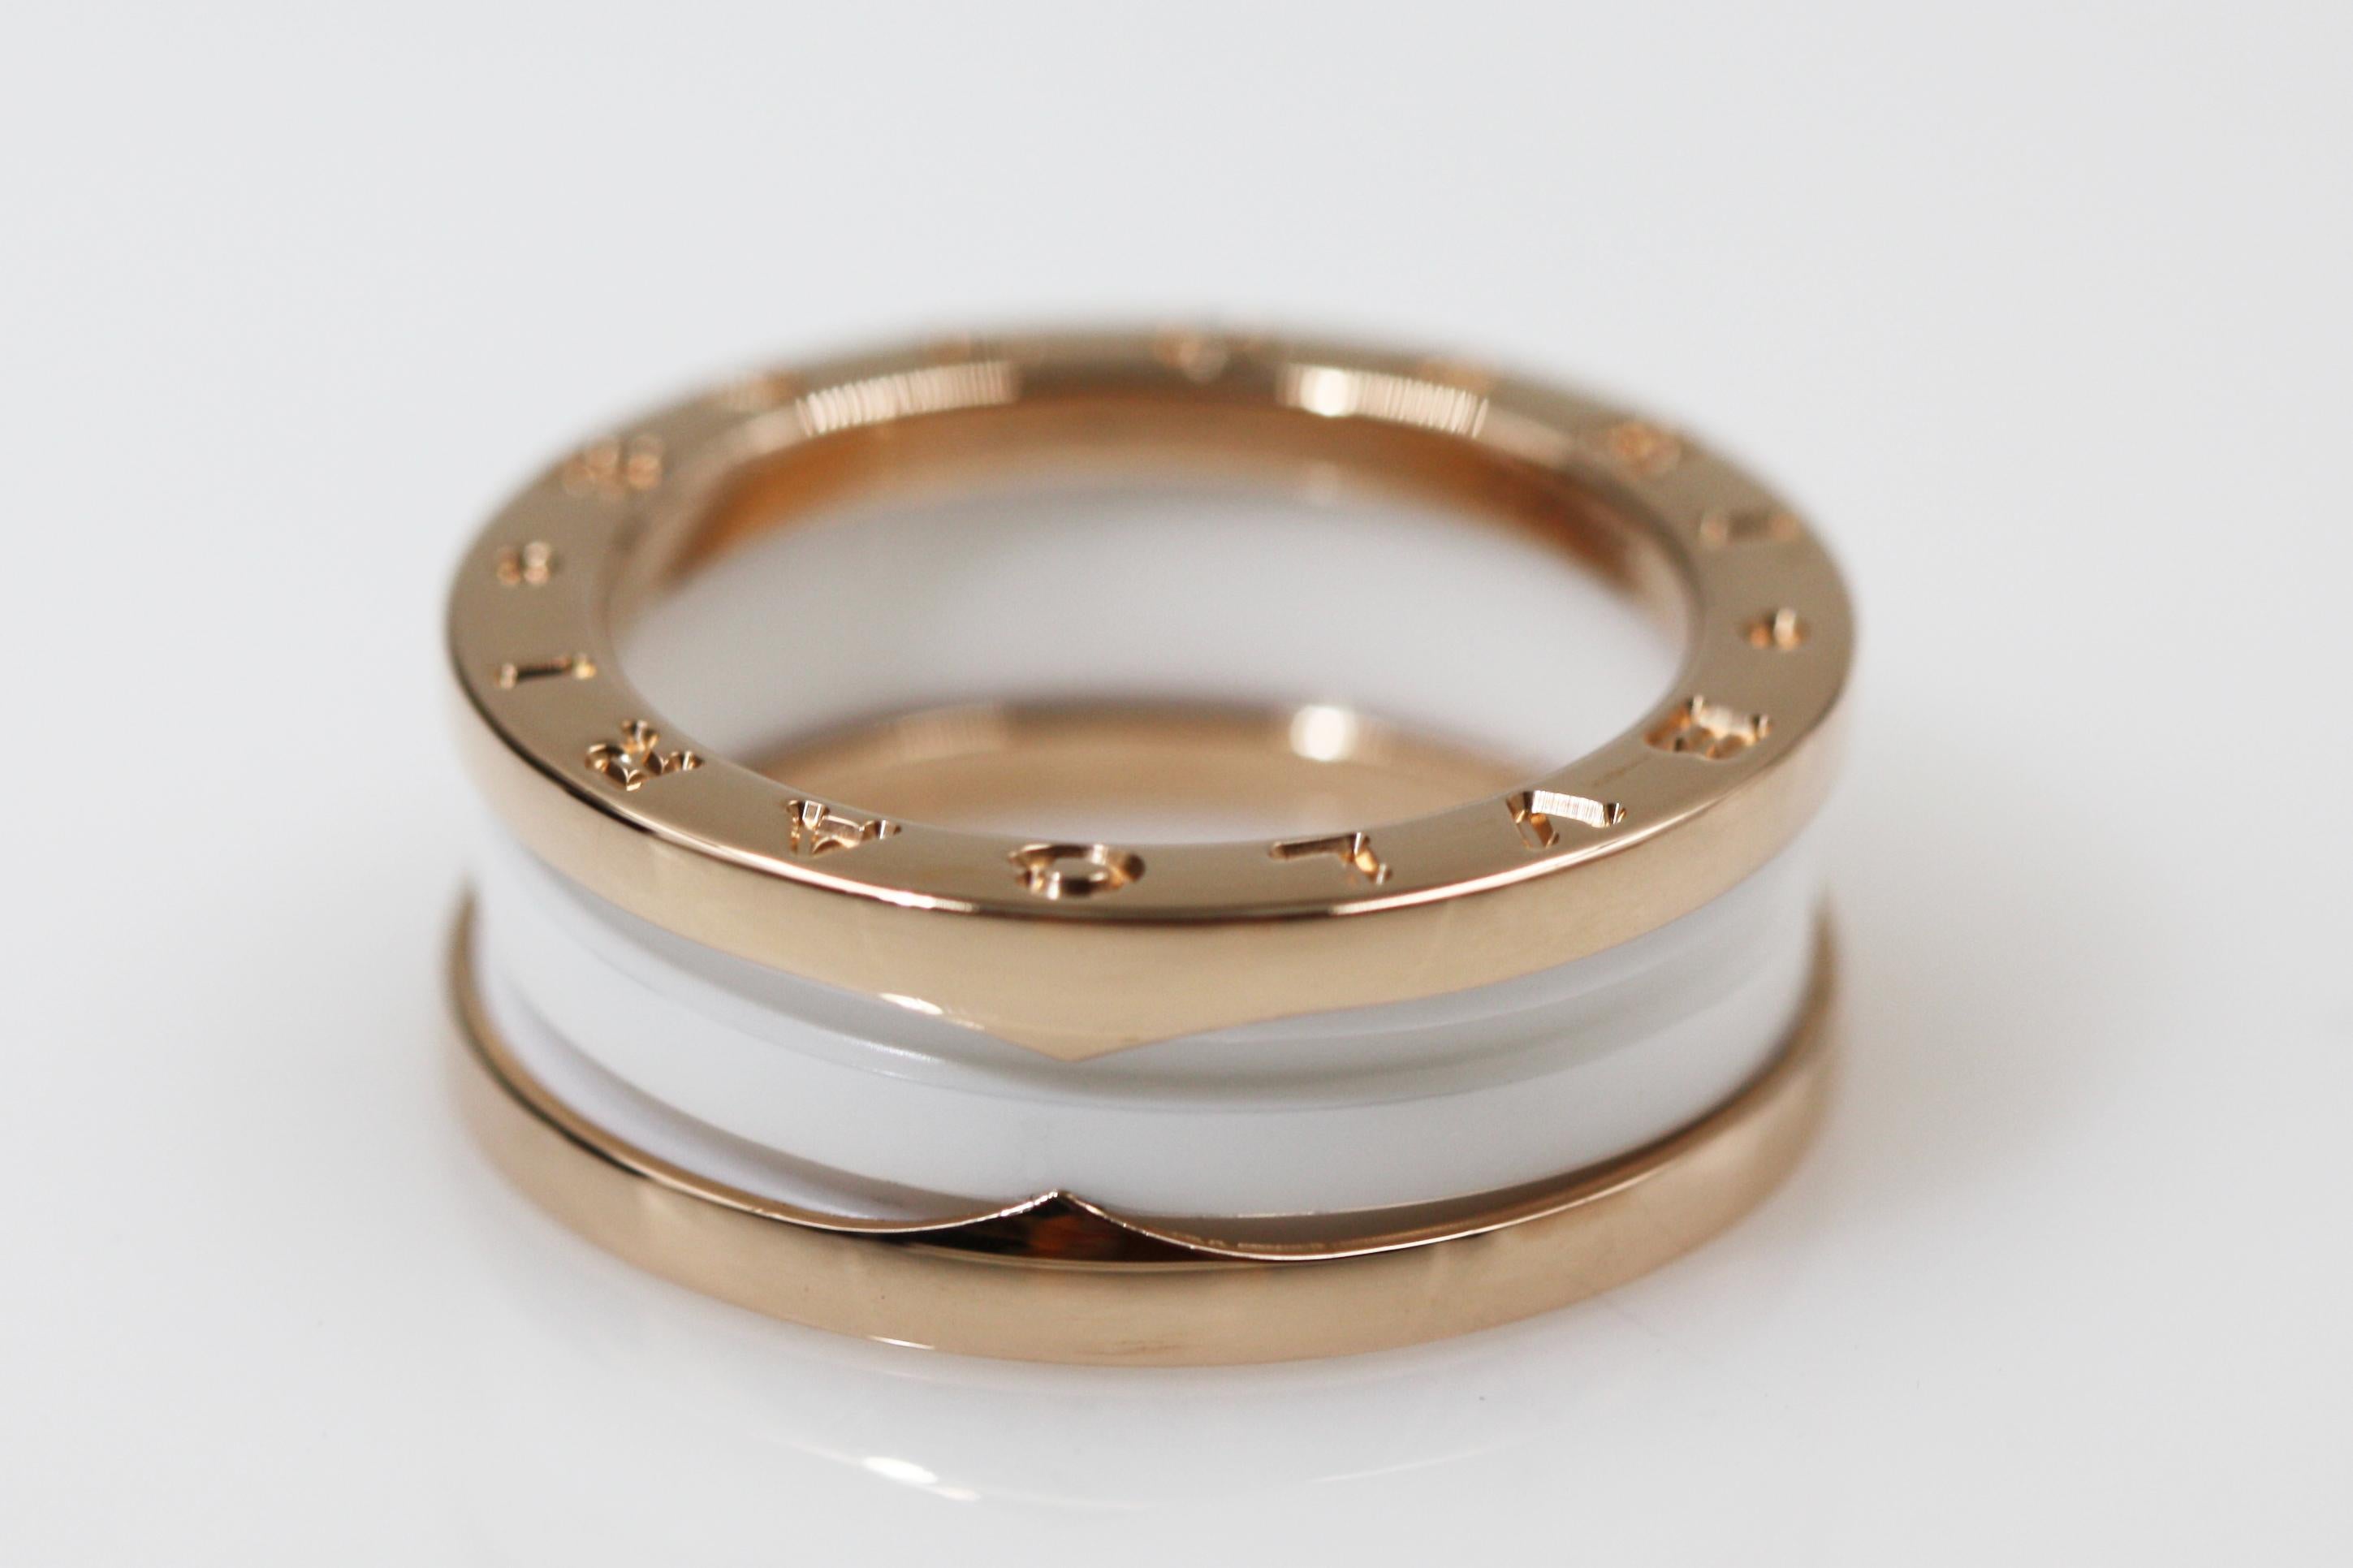 B.Zero 1
REF: AN855564
A beautiful B.zero 1 two-band ring with two 18 kt rose gold loops and a white ceramic spiral.

Item will come with box and certificate.
Size: EU 55 US 7.25
Stock#: BLG185